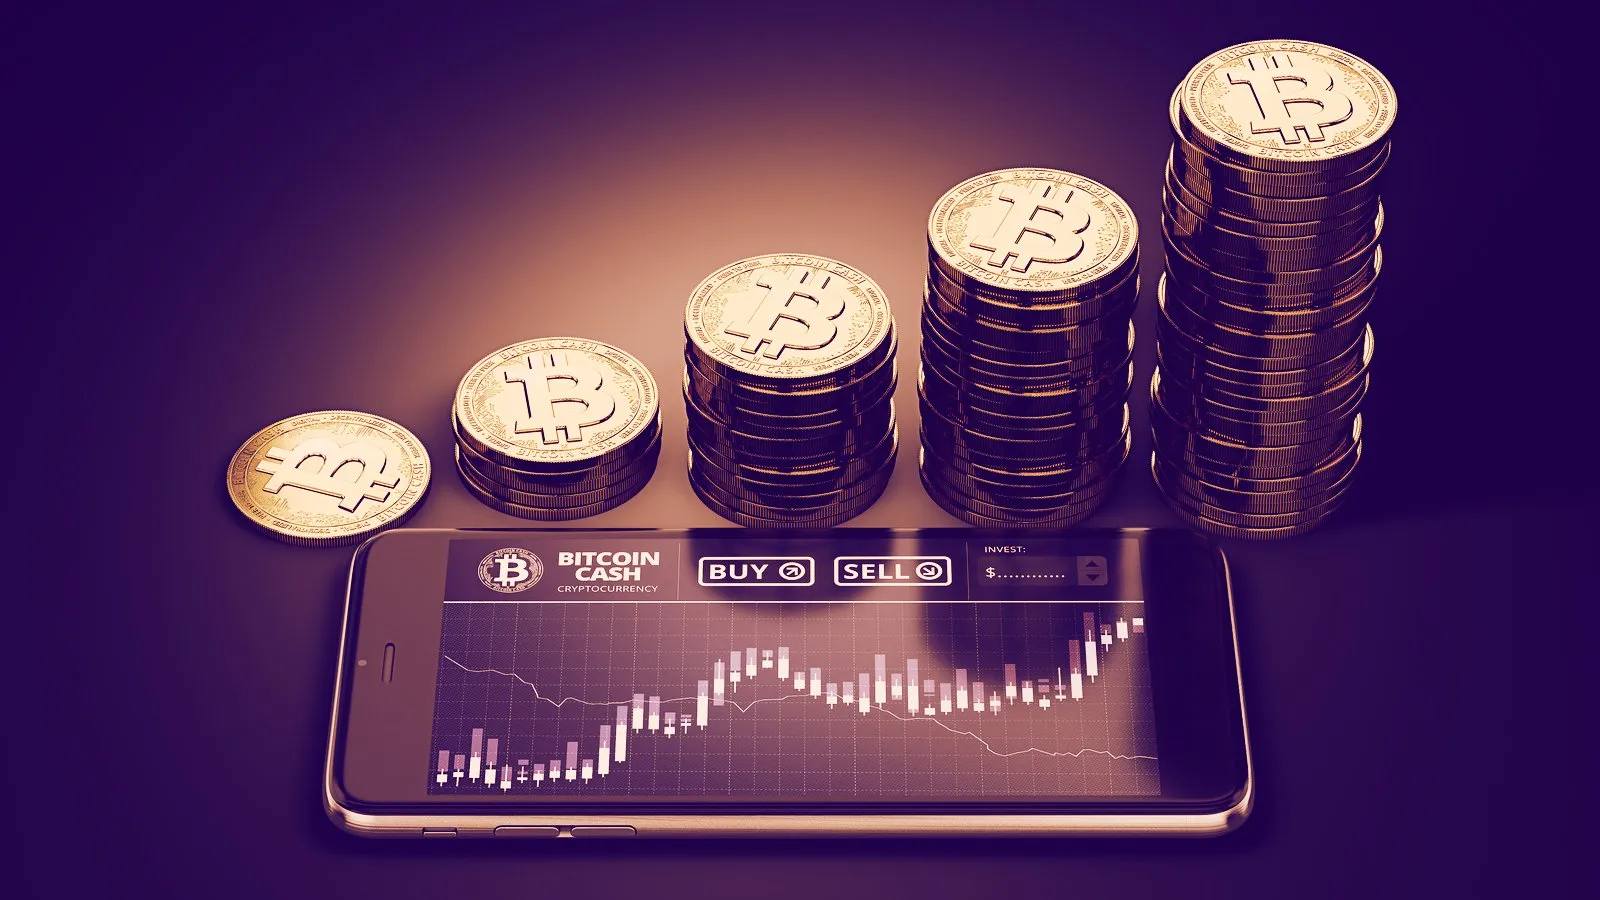 Bitcoin’s price has partly recovered from its downward spiral last Wednesday, with highs of almost $9,600 this week. Image: Shutterstock